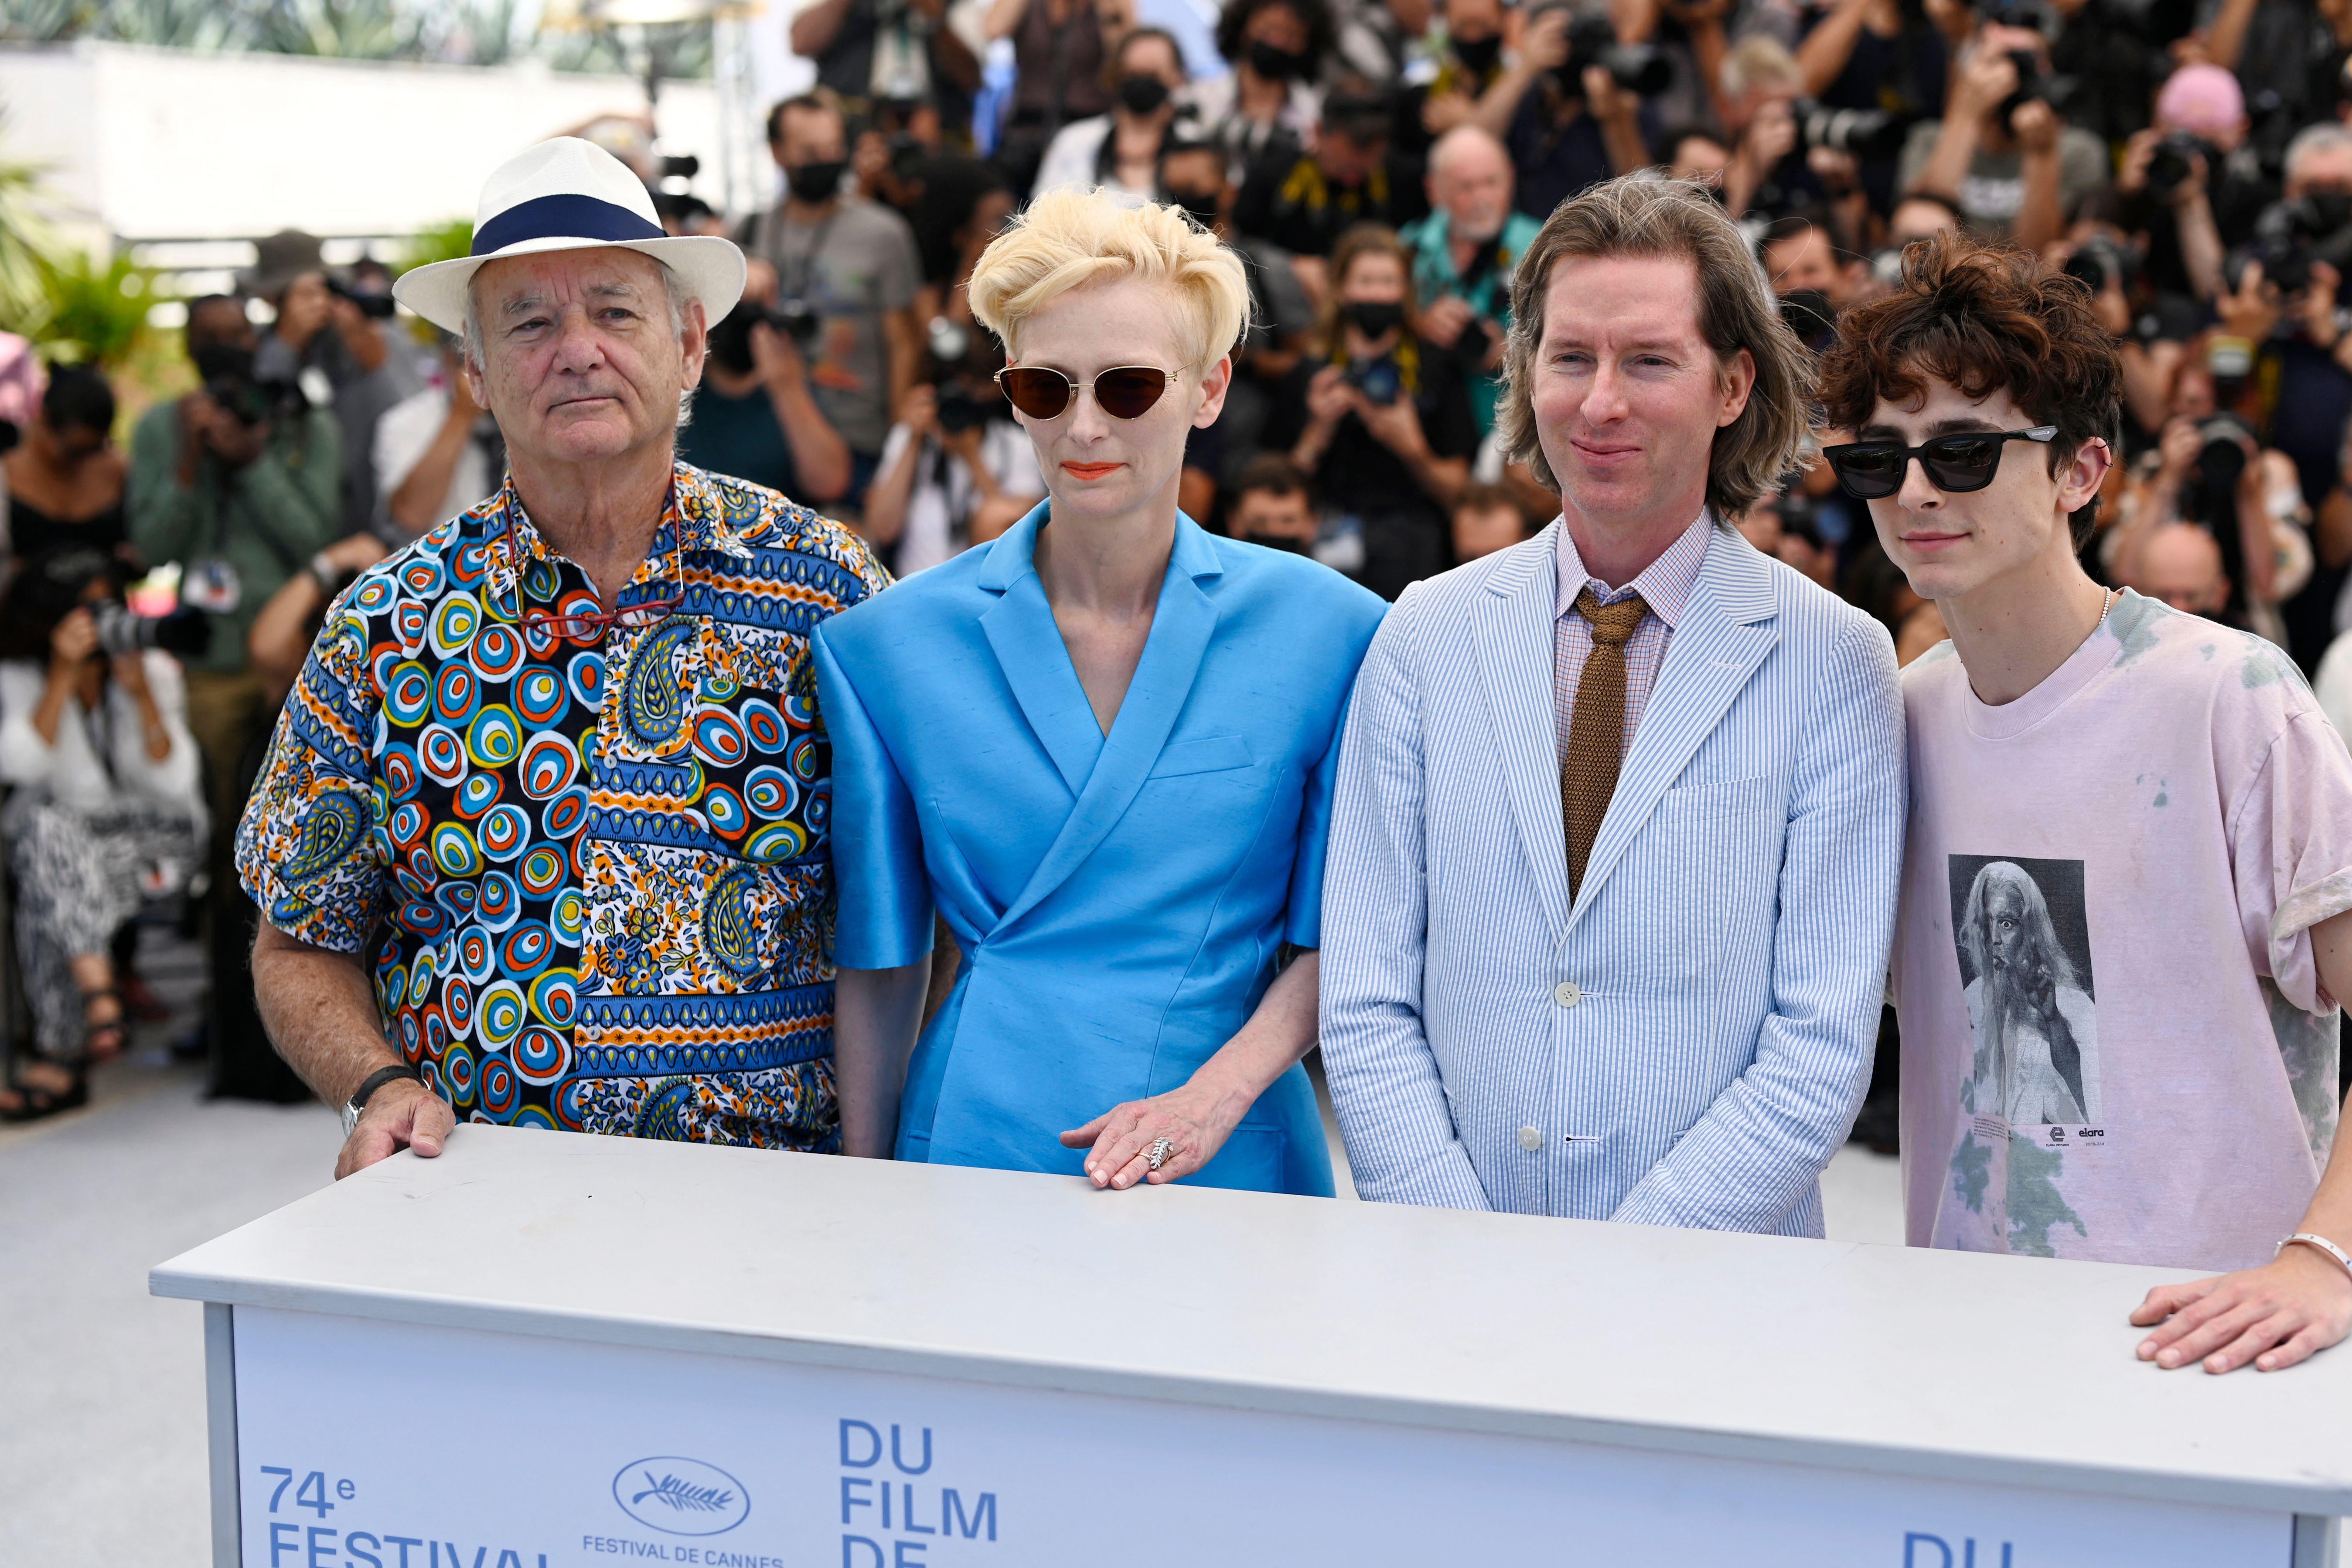 U.S. actor Bill Murray, British actress Tilda Swinton, U.S. director Wes Anderson and French-U.S. actor Timothee Chalamet pose during a photo call for the film "The French Dispatch" at the 74th edition of the Cannes Film Festival in Cannes, southern France.